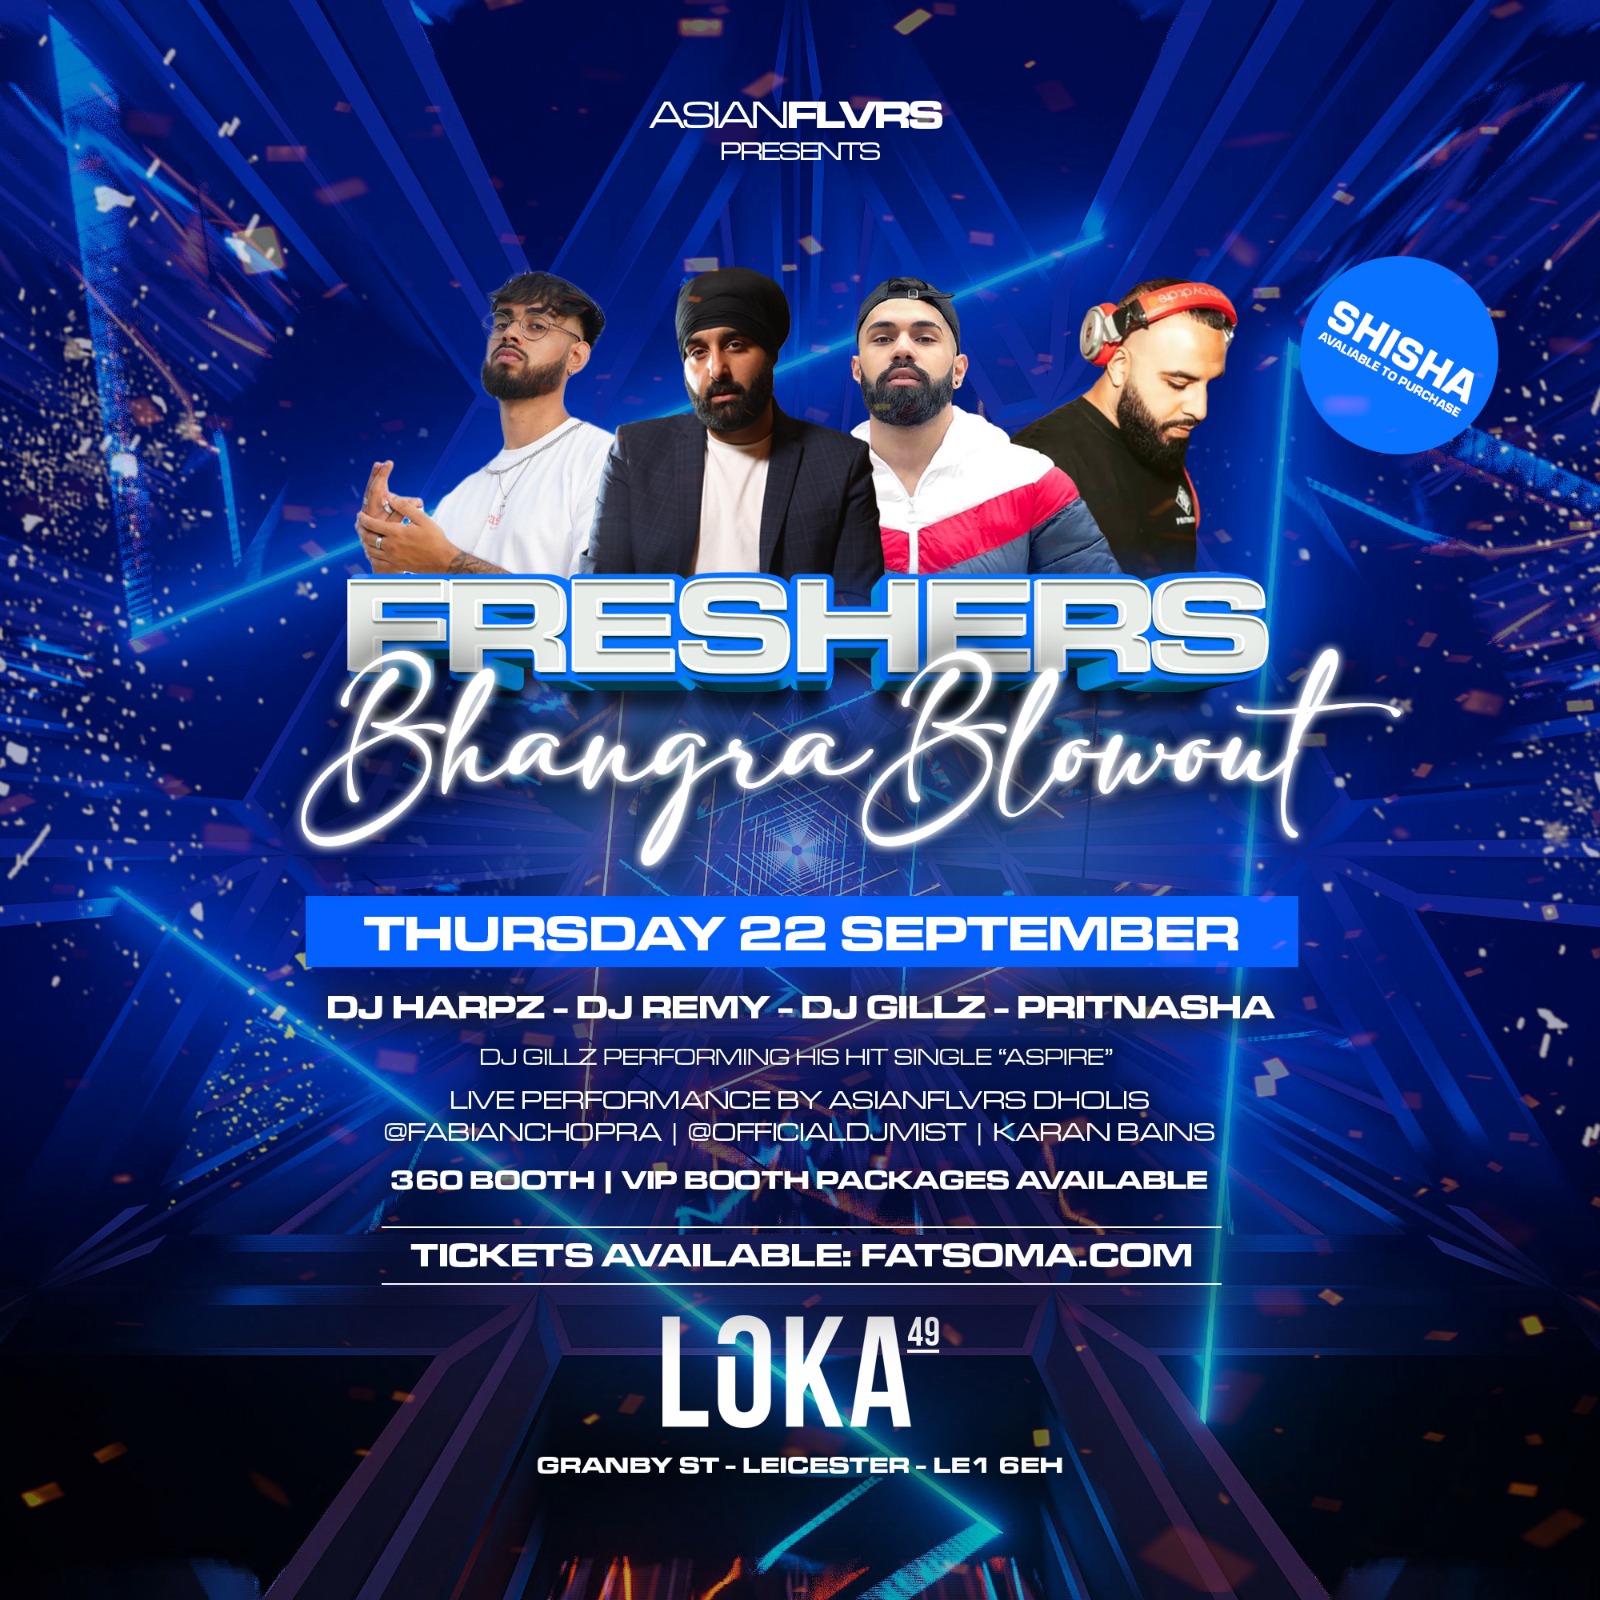 ASIANFLVRS LAUNCH PARTY (FRESHERS BHANGRA BLOWOUT!) at Lôka Bar